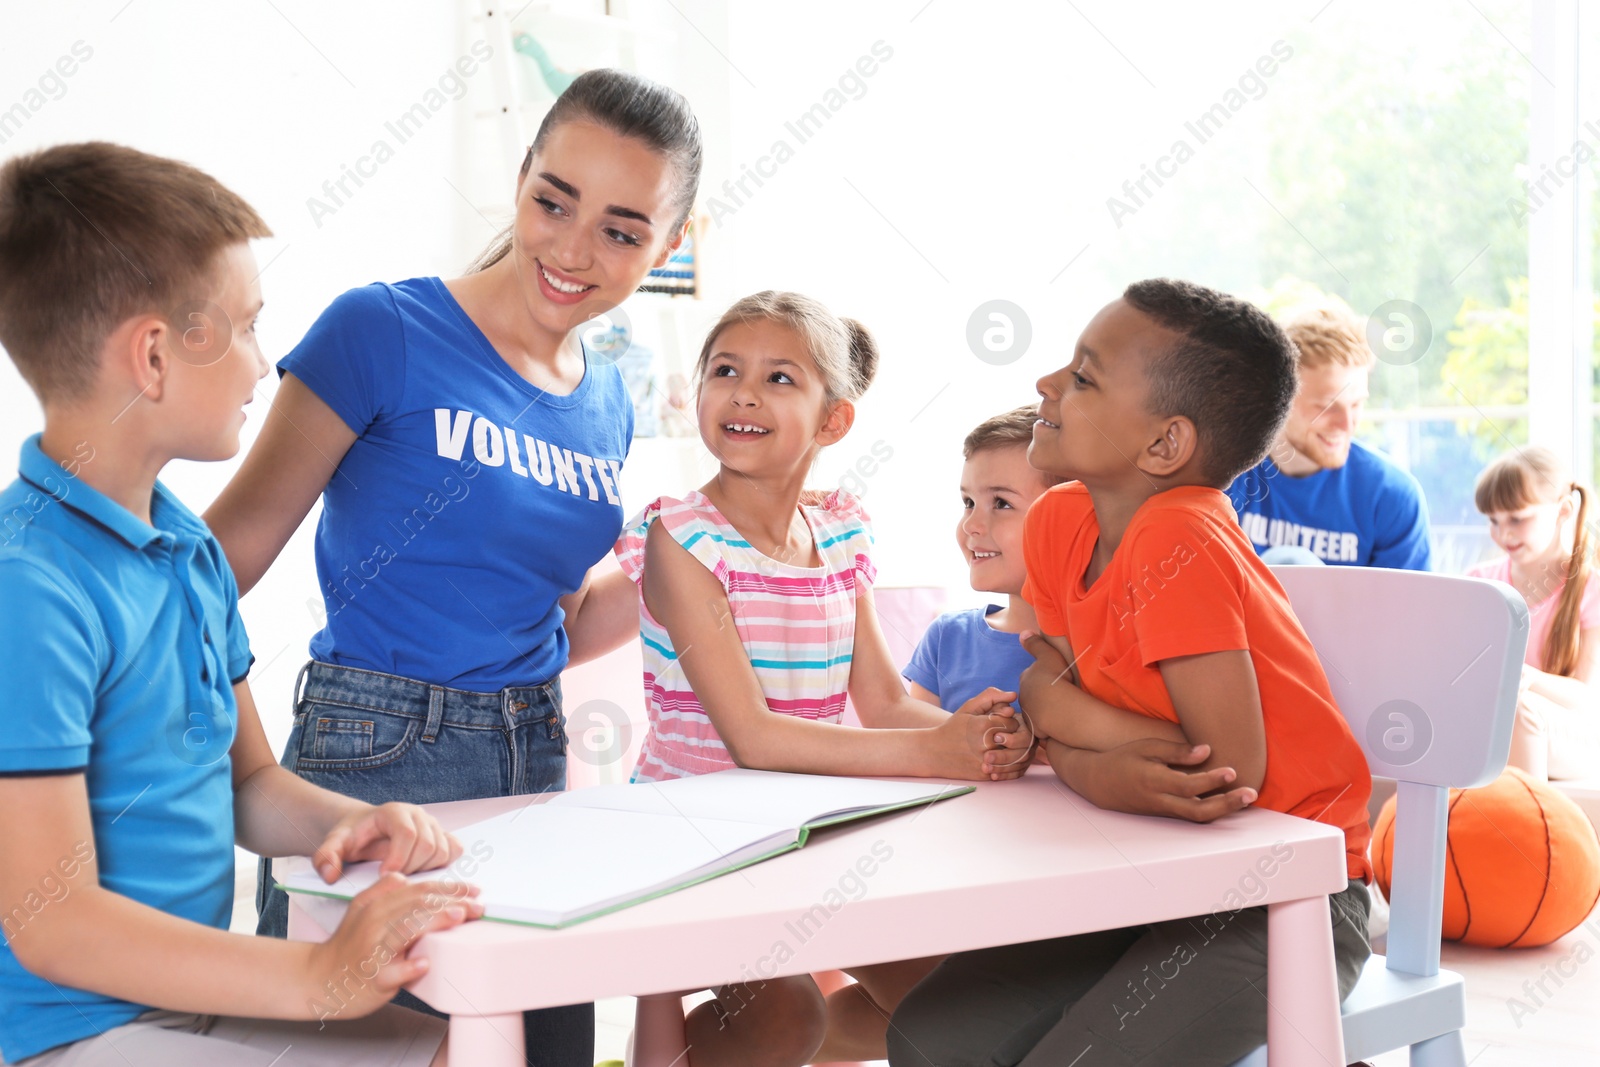 Photo of Young volunteer reading book with children at table indoors